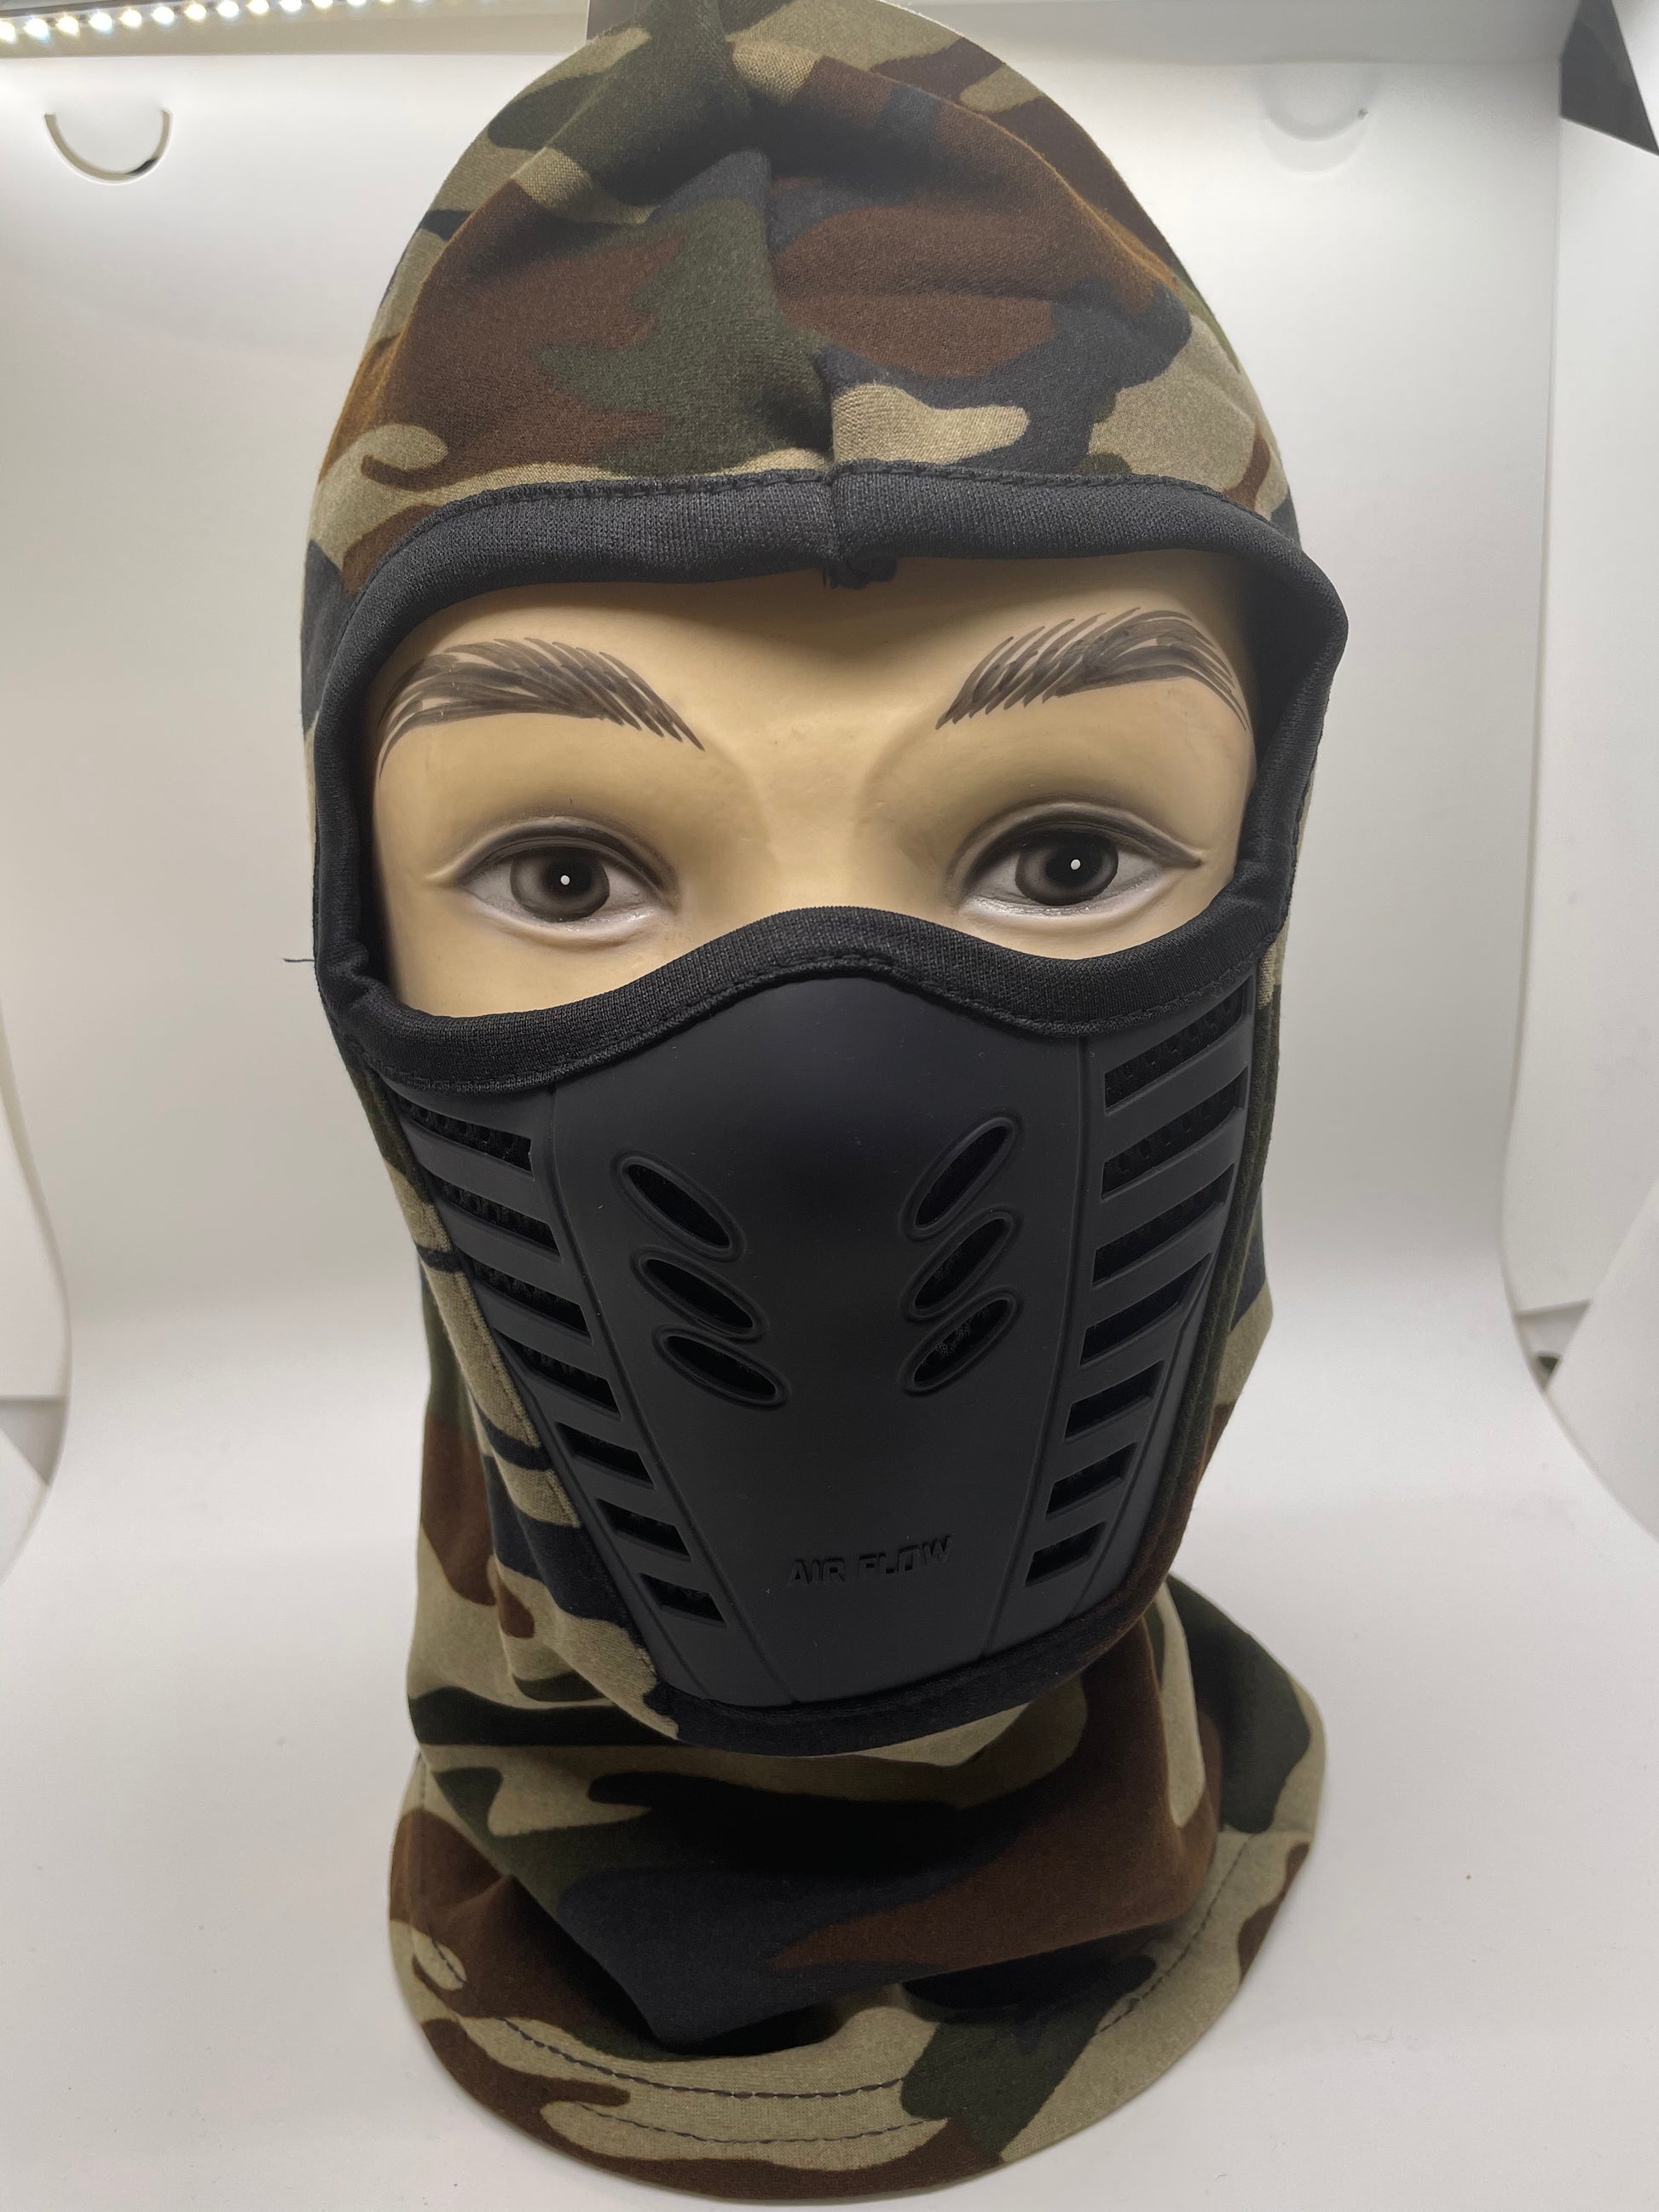 "Camo full face mask with a padded headband and a stretchy fit"